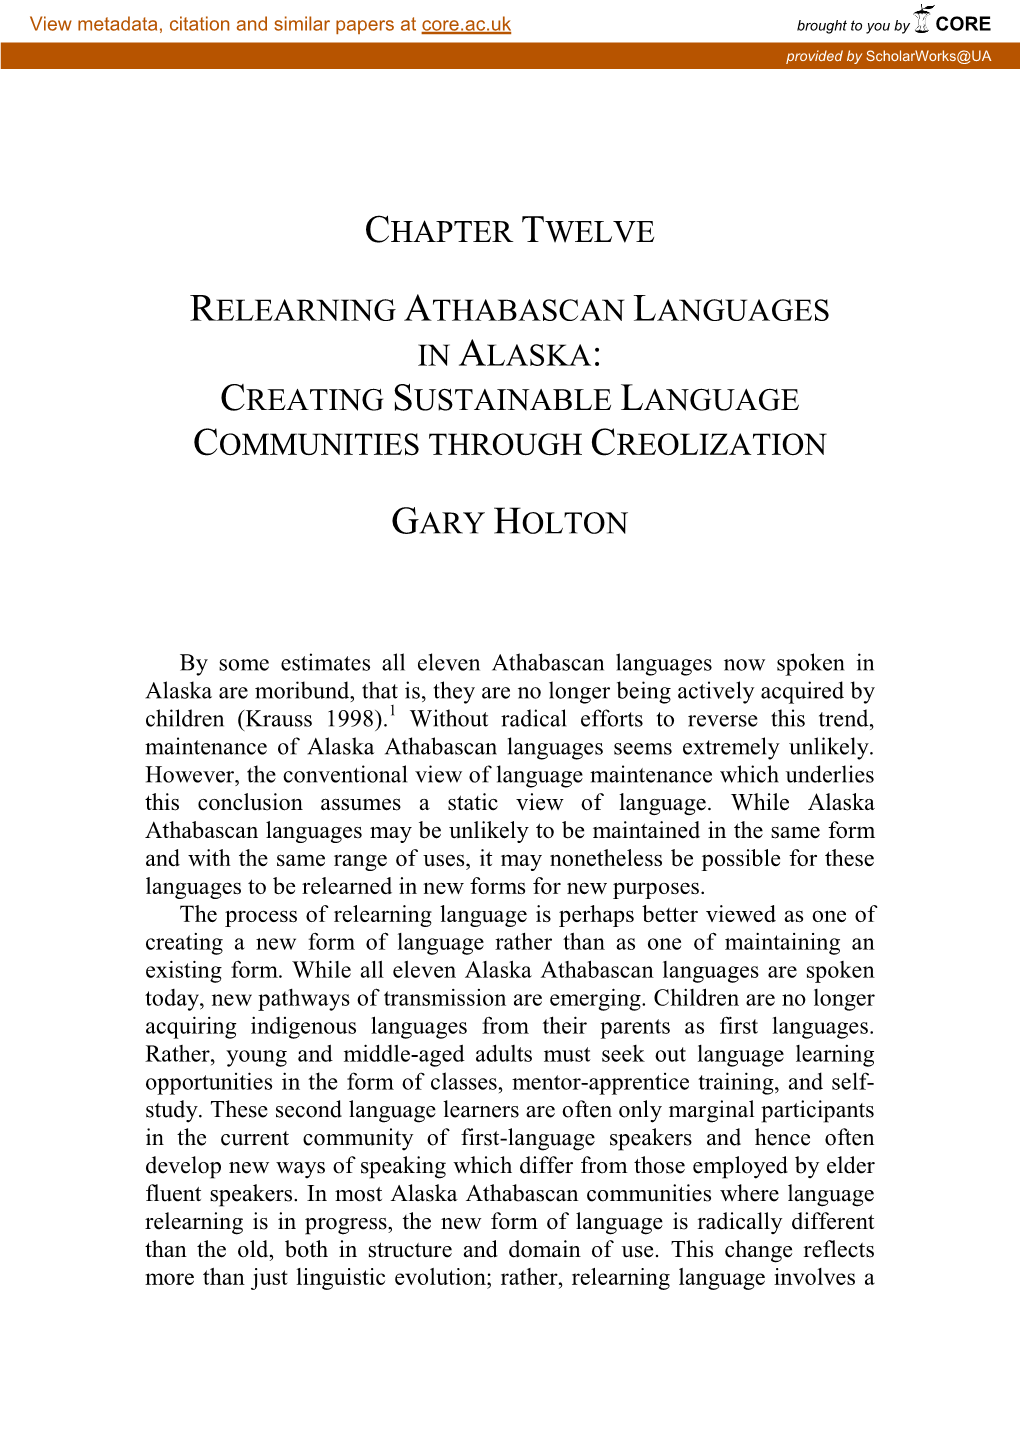 Relearning Athabascan Languages in Alaska : Creating Sustainable Language Communities Through Creolization